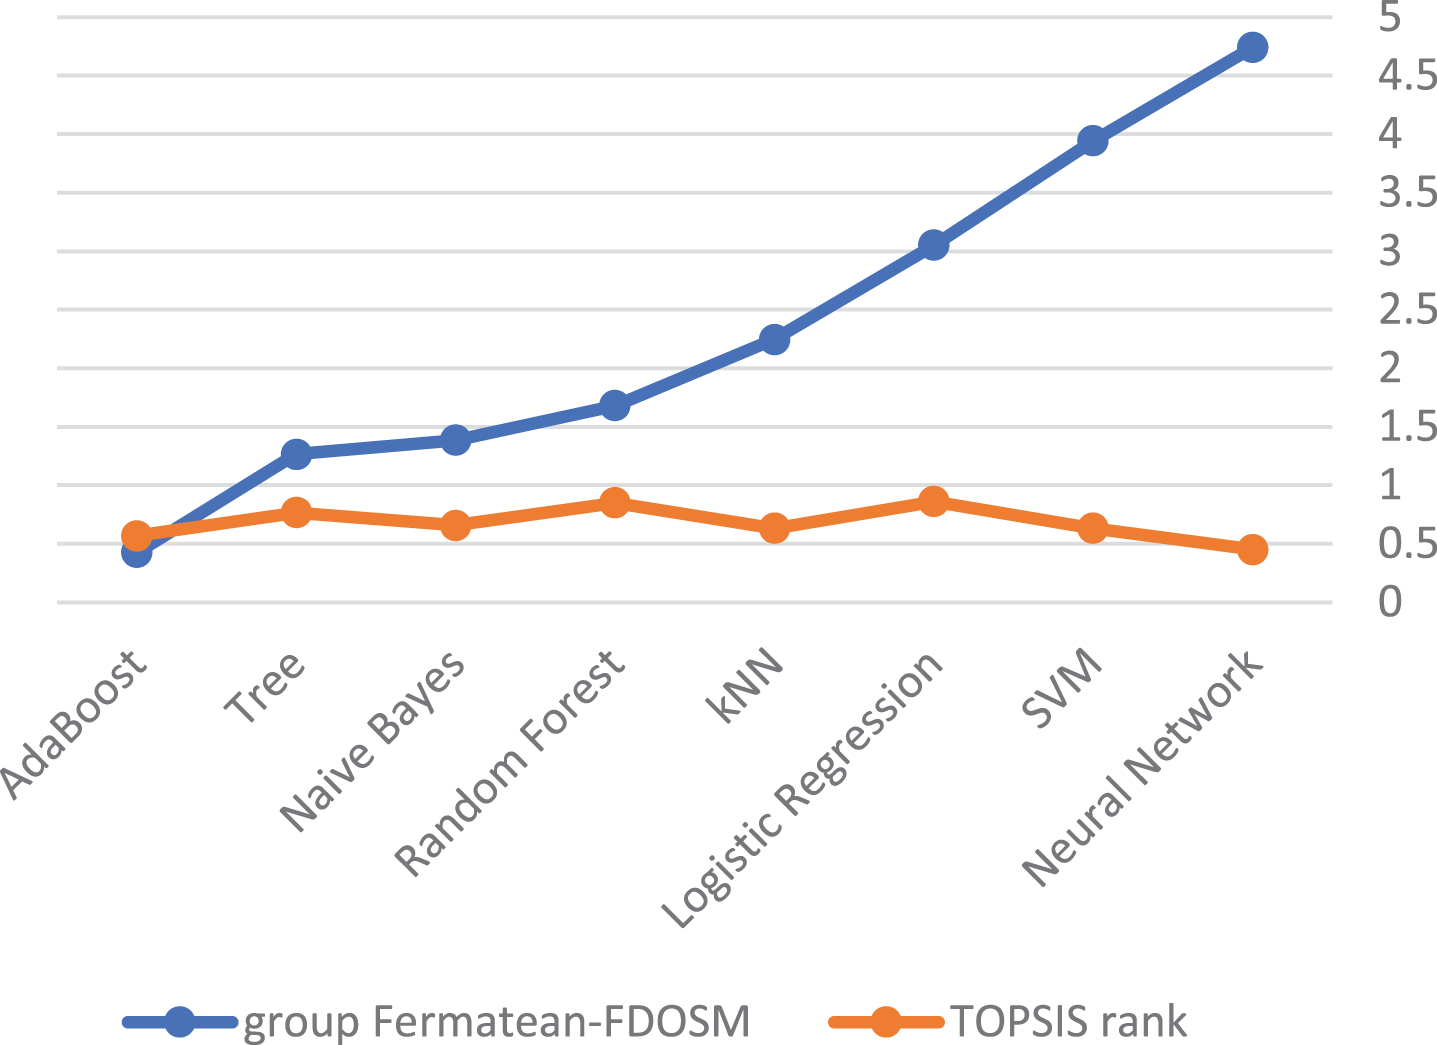 The differences between ranks of group Fermatean-FDOSM and TOPSIS.